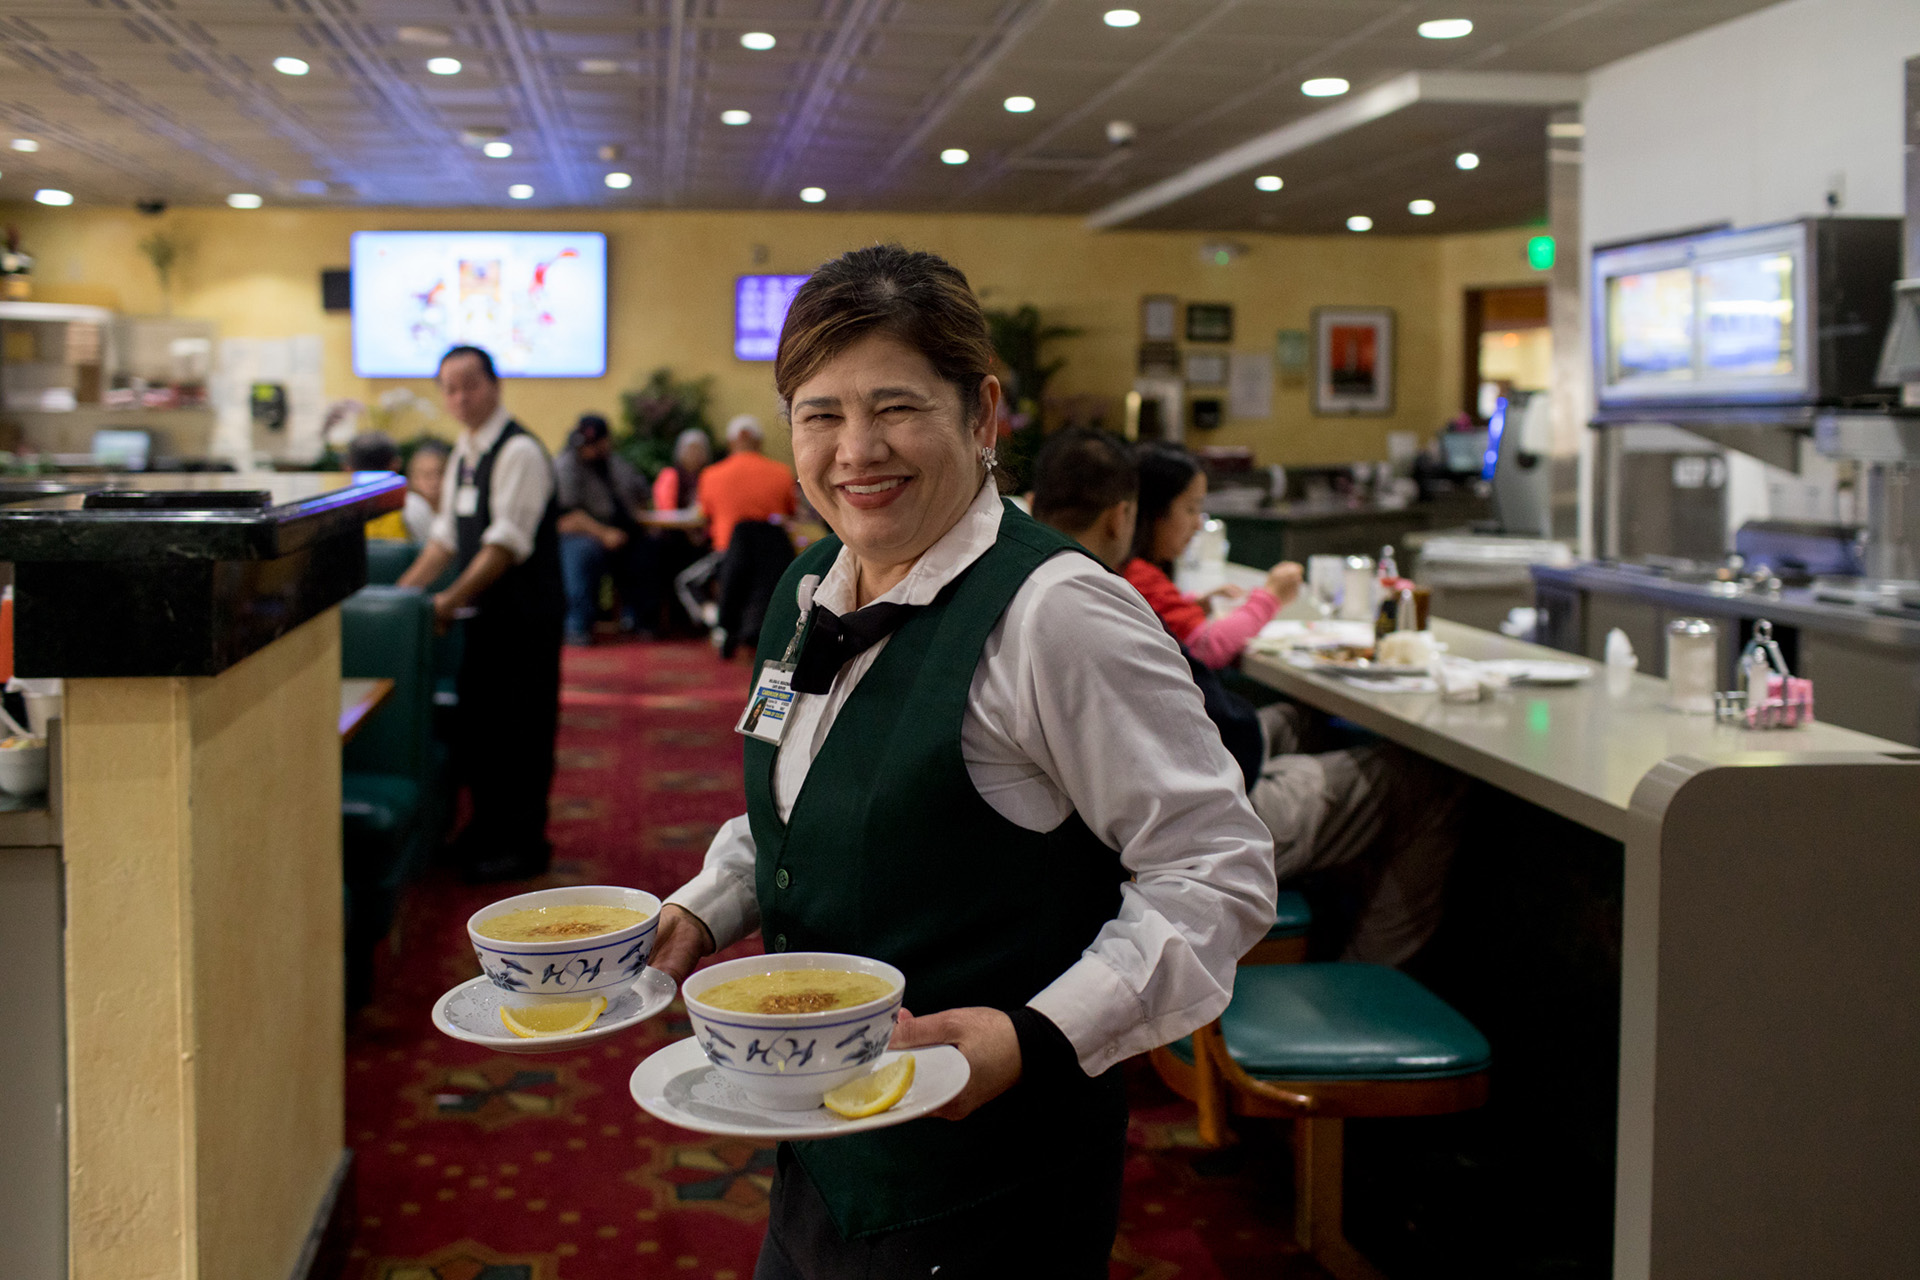 Lucky Chances casino has an all-ages cafe that serves Filipino classics along with American diner staples. Server Melissa Deguzman carries goto (beef tripe and garlic rice porridge) to customers.